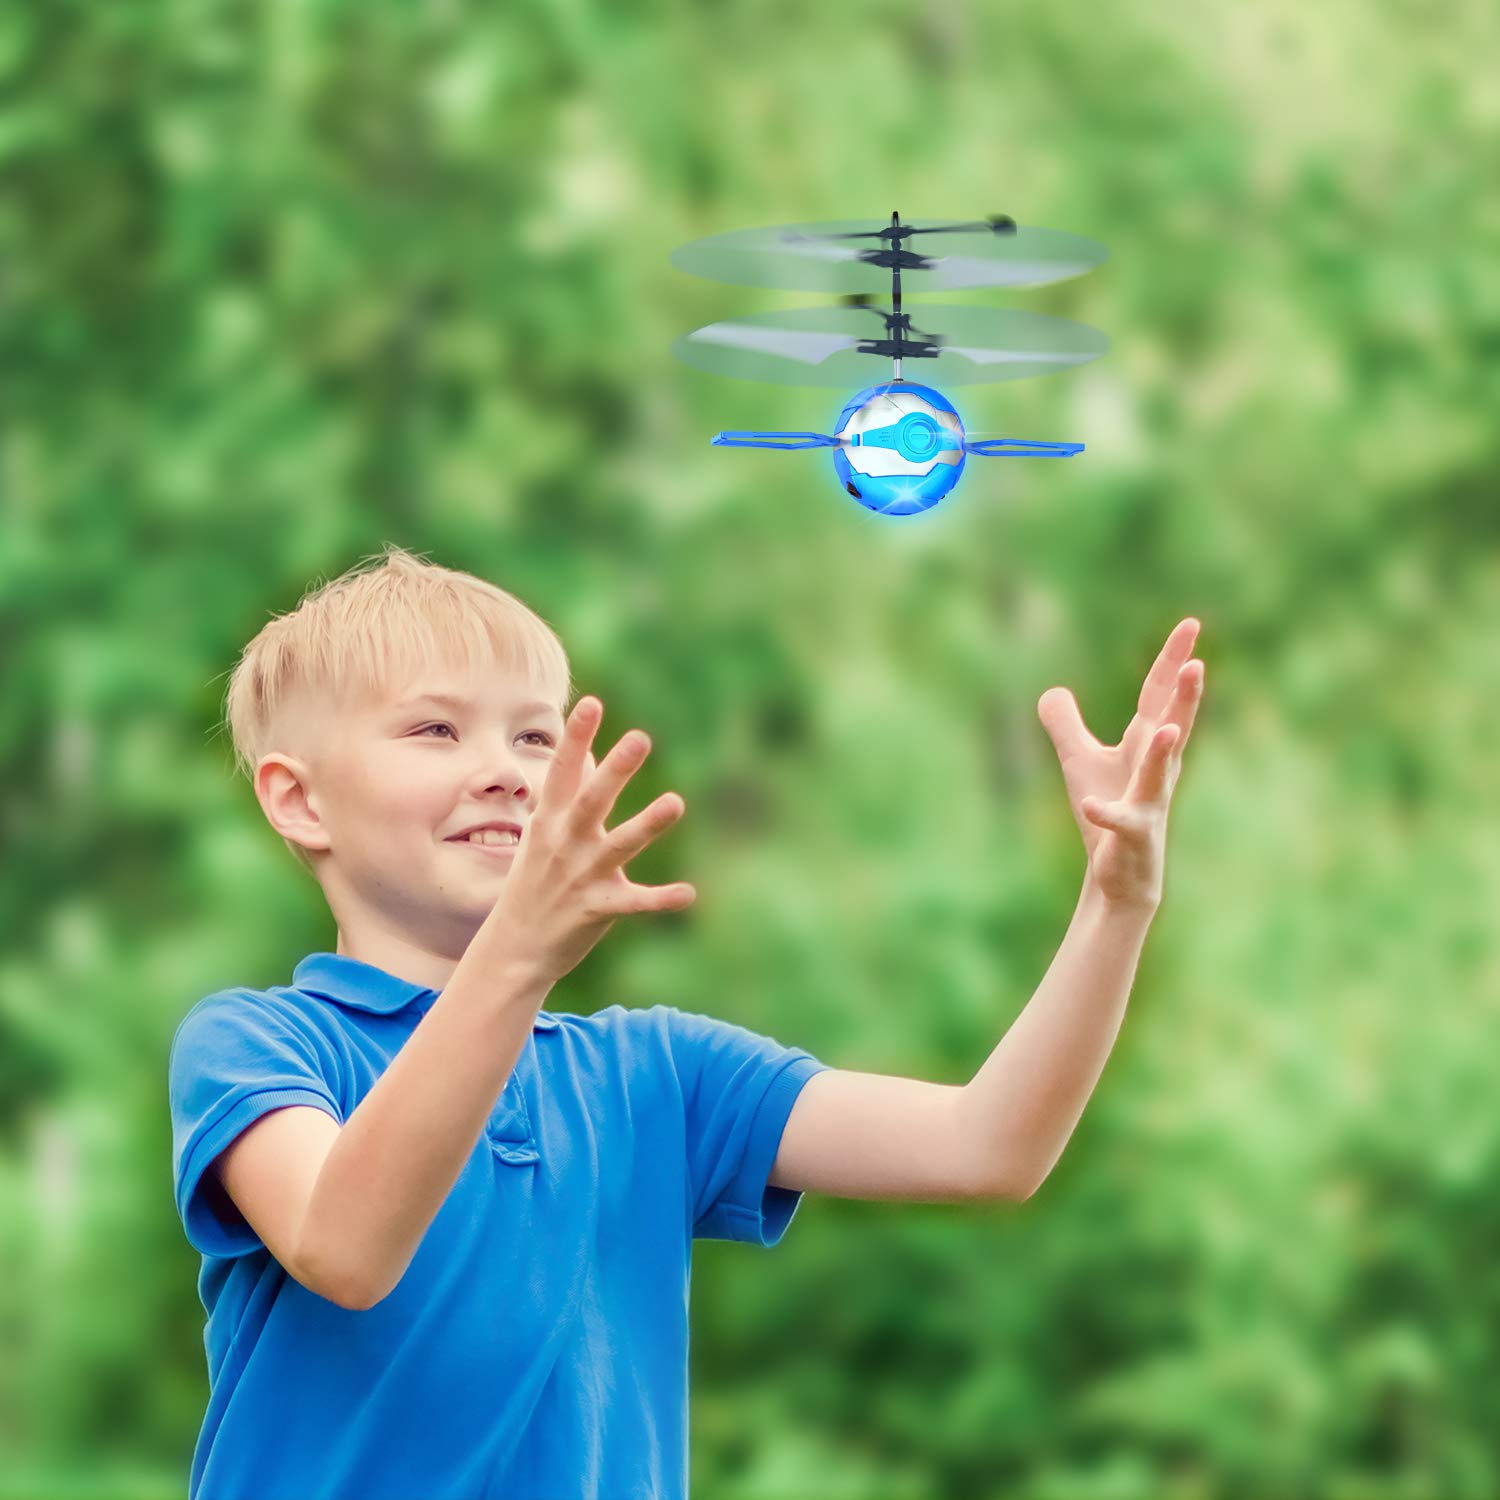 CUKU Flying Toy Ball,Infrared Induction UFO RC Flying Toy,Built-in LED Flying Drone Indoor and Outdoor Games,UFO Flying Ball Toys for 6 7 8 9 10 Year Old Boys and Girls